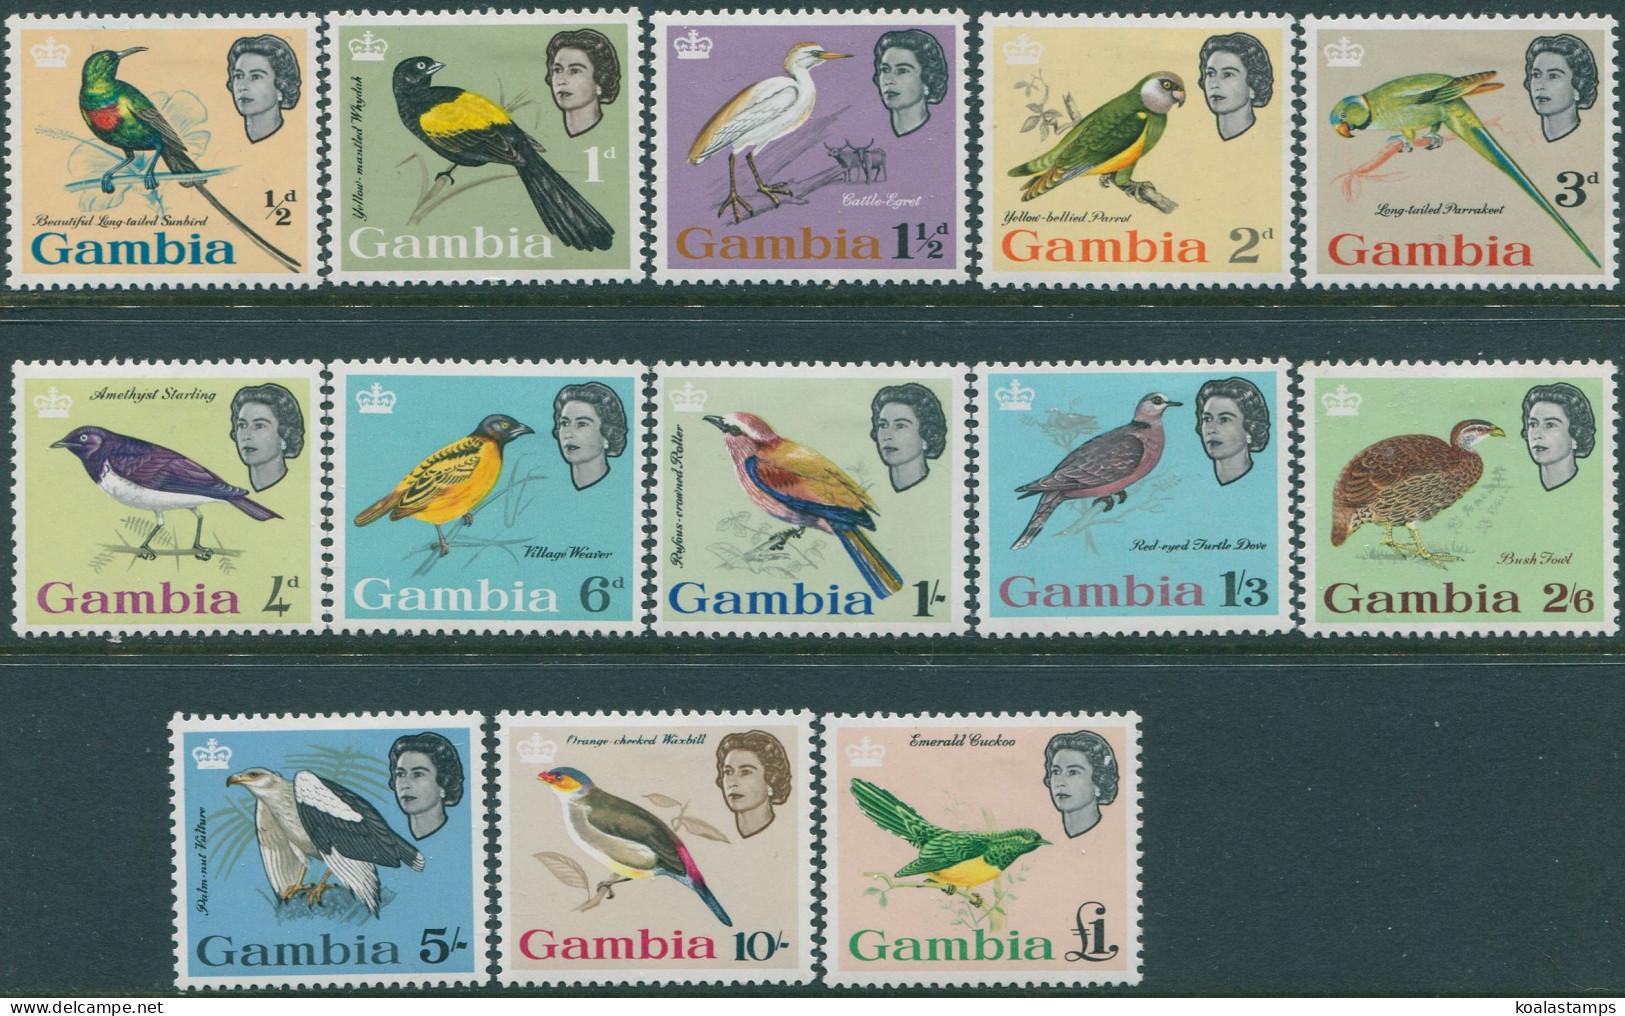 Gambia 1963 SG193-205 Birds Set MLH - Gambia (1965-...)